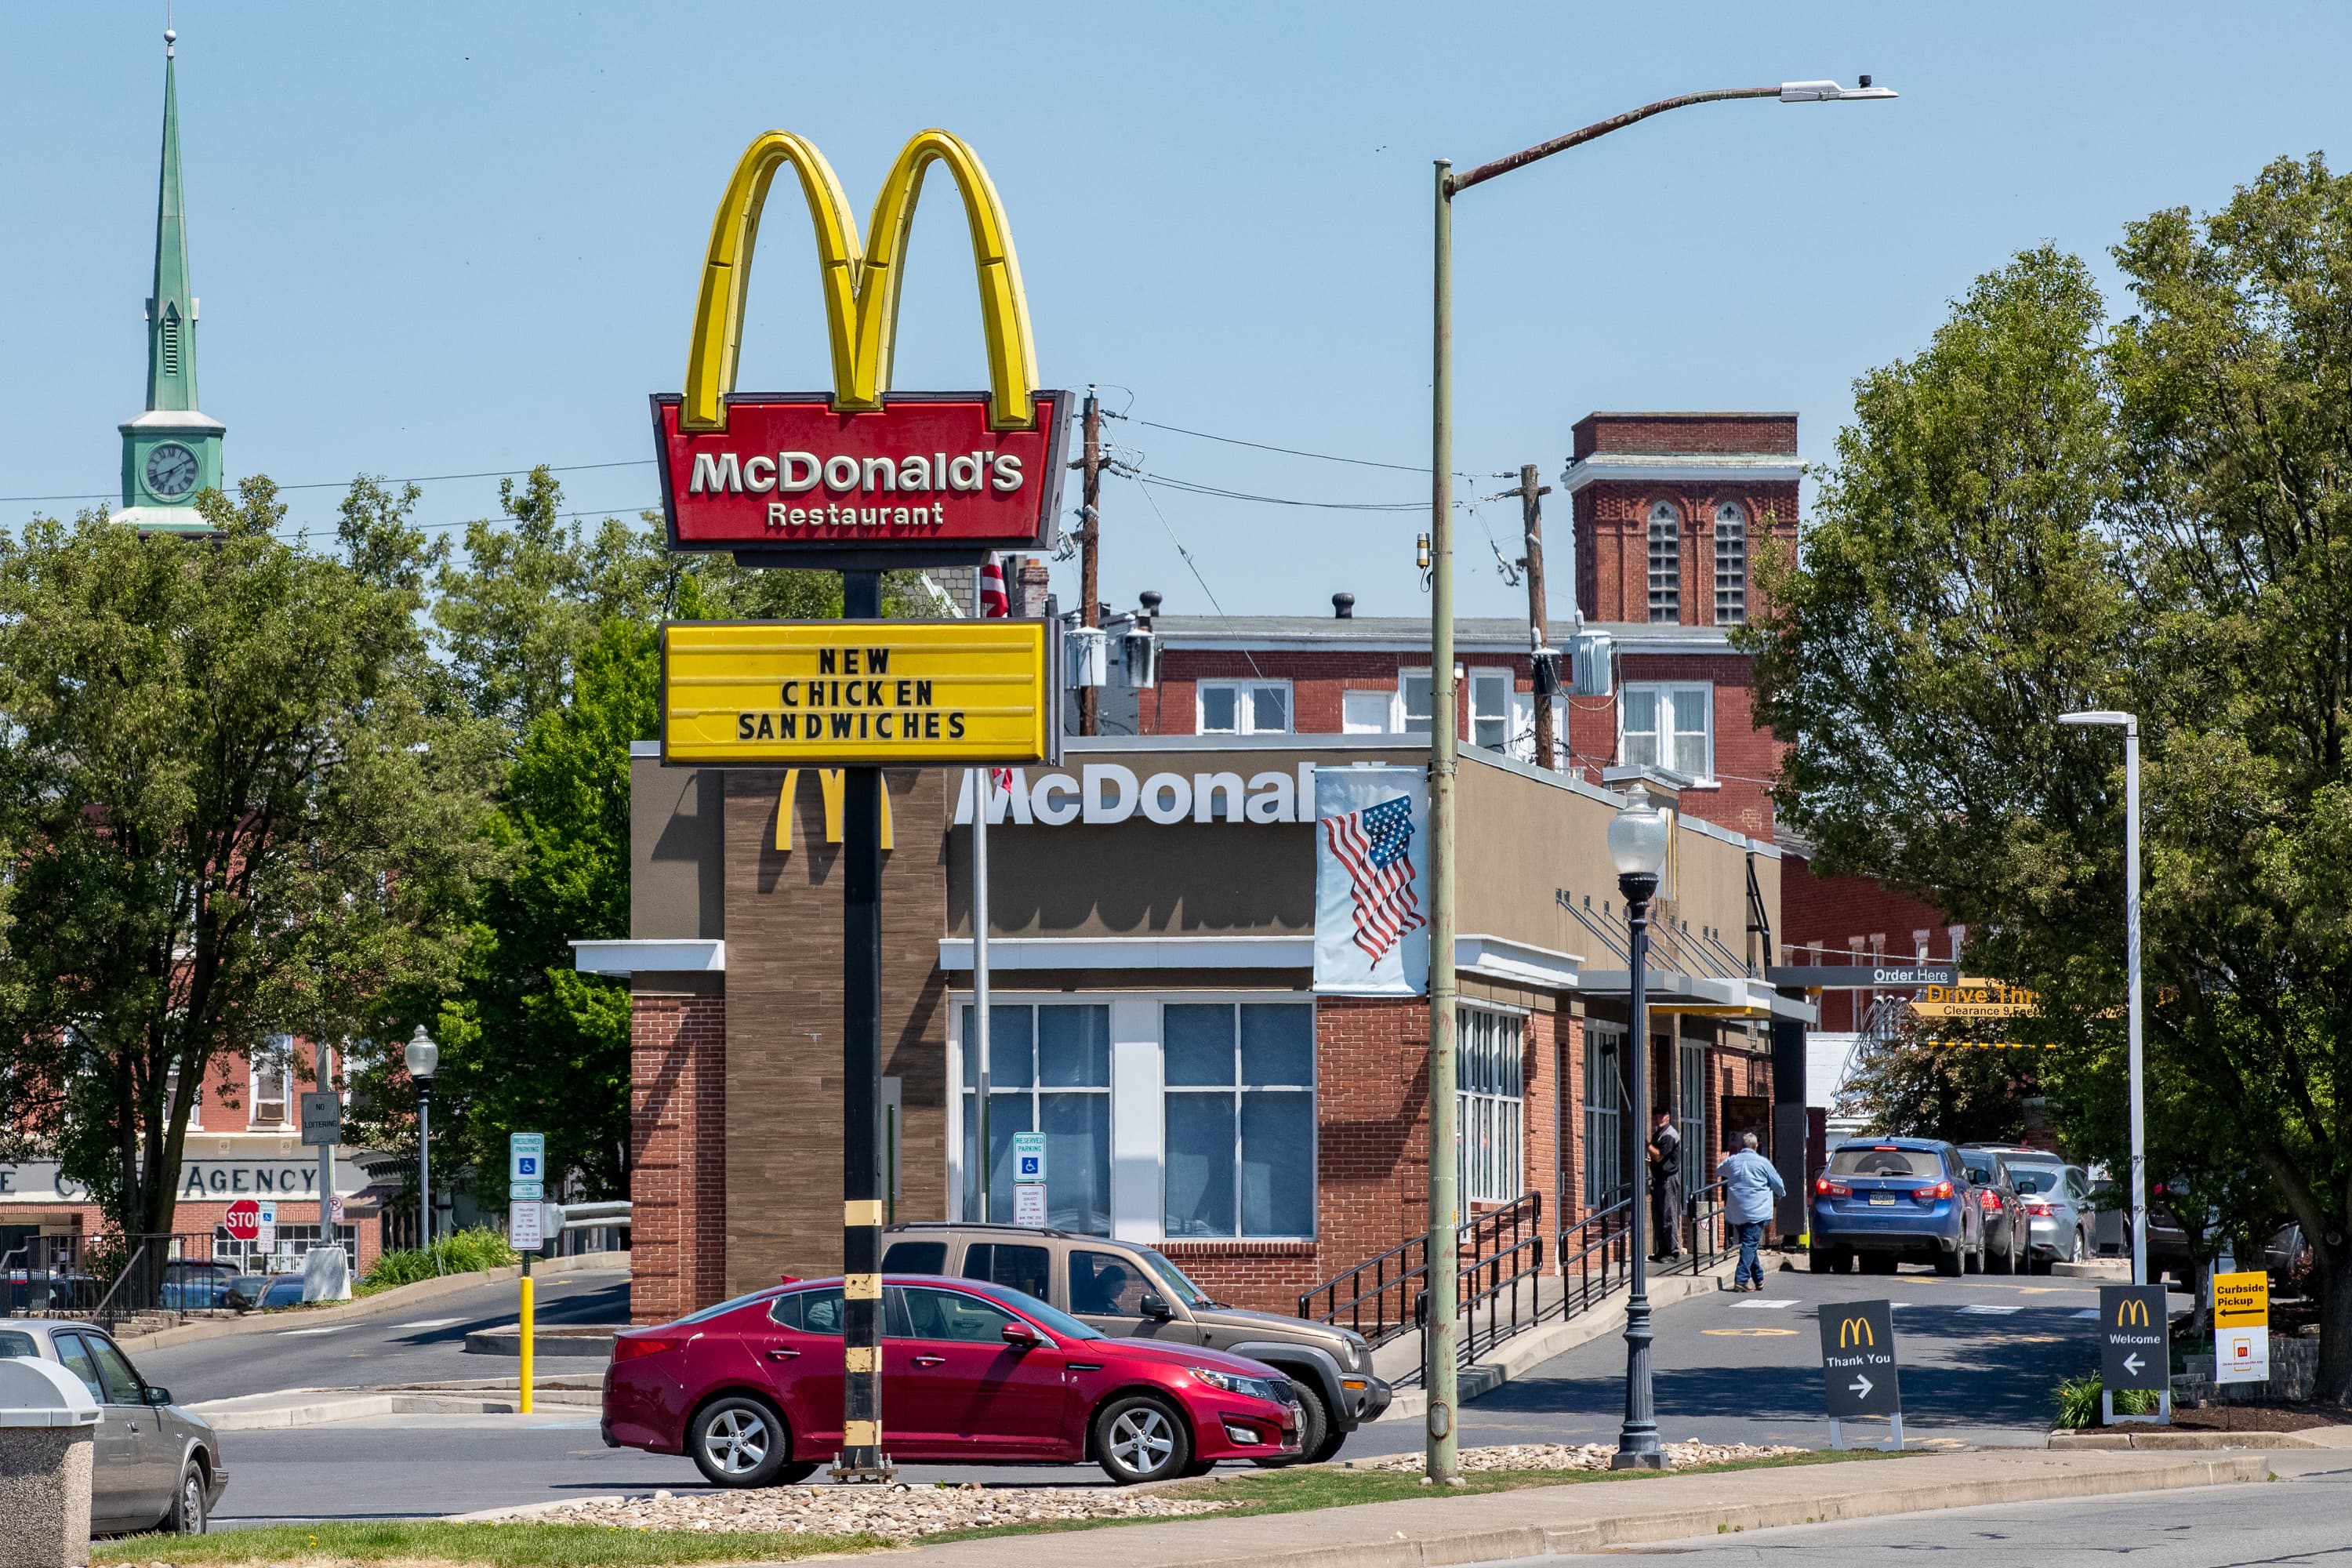 McDonald’s Raises Royalty Fees for Franchisees: What You Need to Know